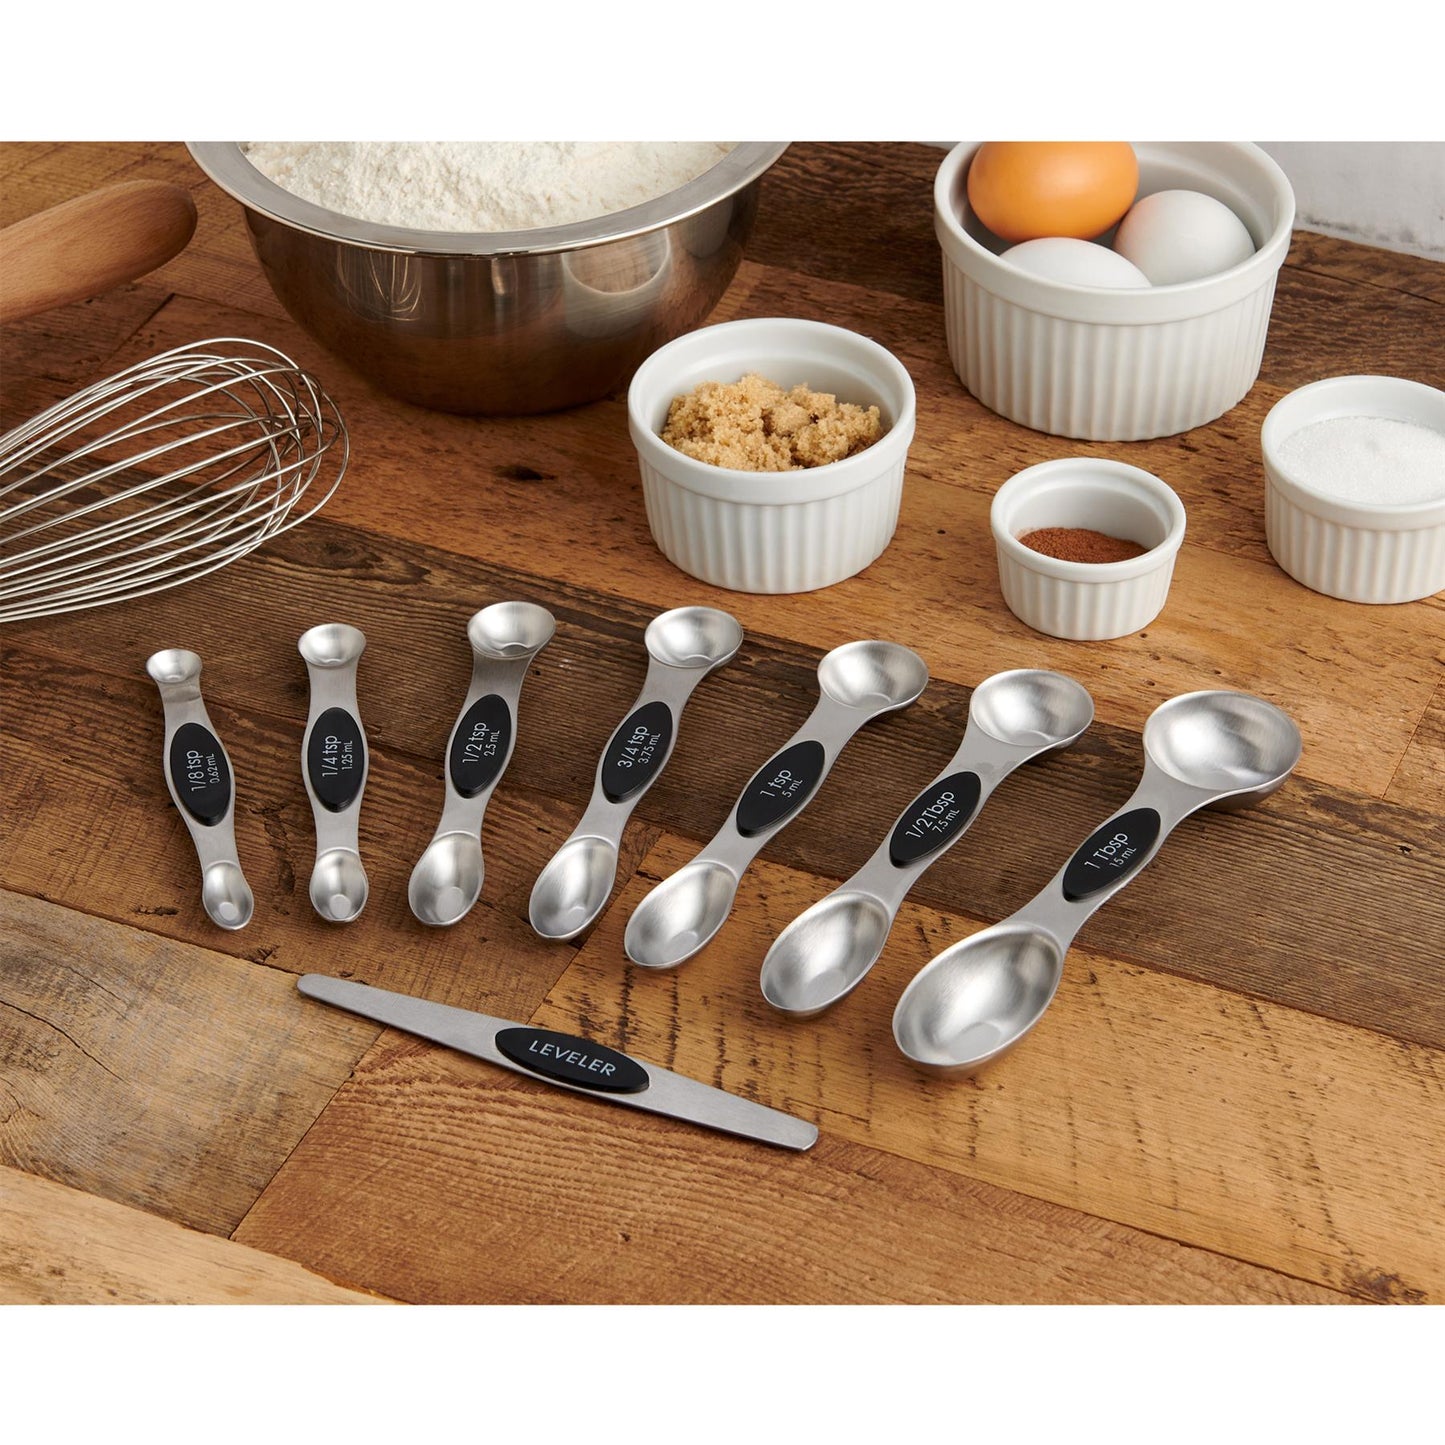 Mrs. Anderson’s Baking Dual-Sided Magnetic Measuring Spoons and Leveler, Heavyweight Stainless Steel, 8-Piece Set